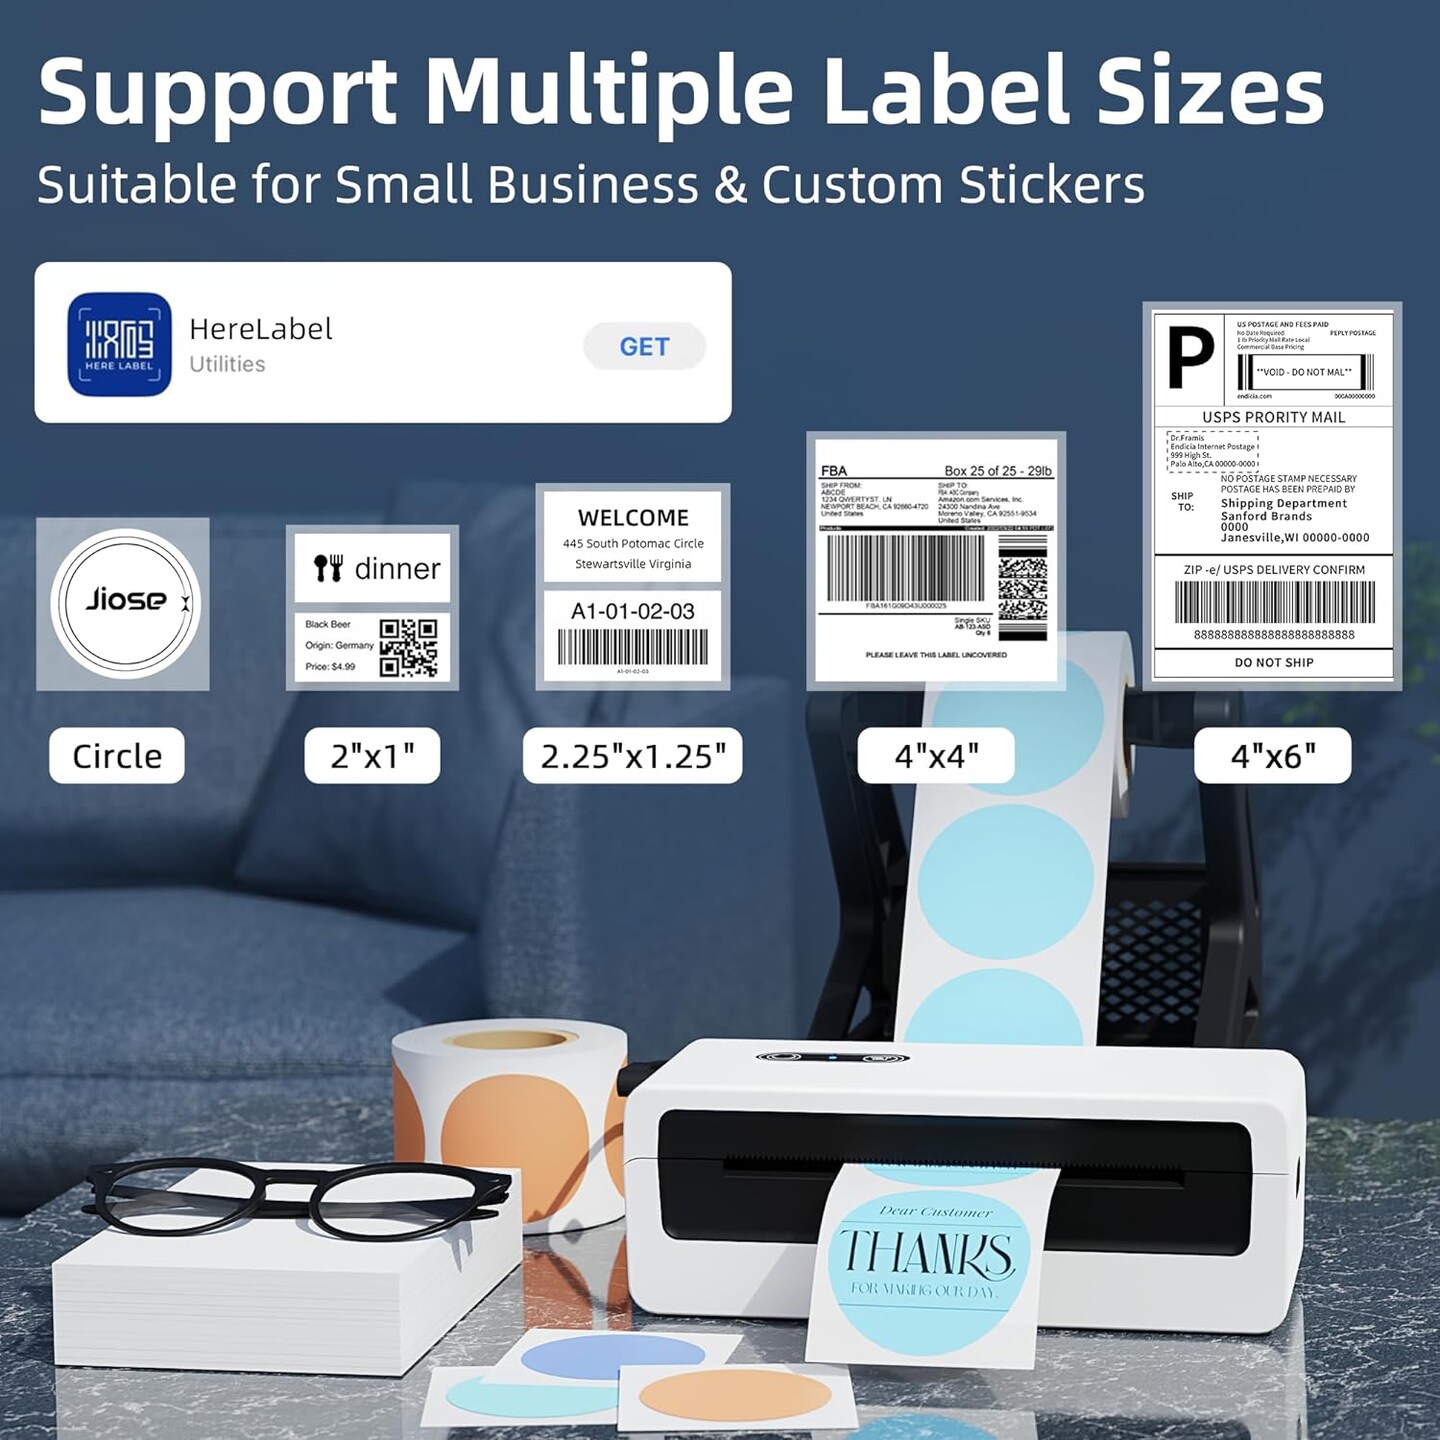 Jiose&#xAE;-Bluetooth Thermal Label Printer - Your Ultimate Solution for Streamlined Labeling Needs